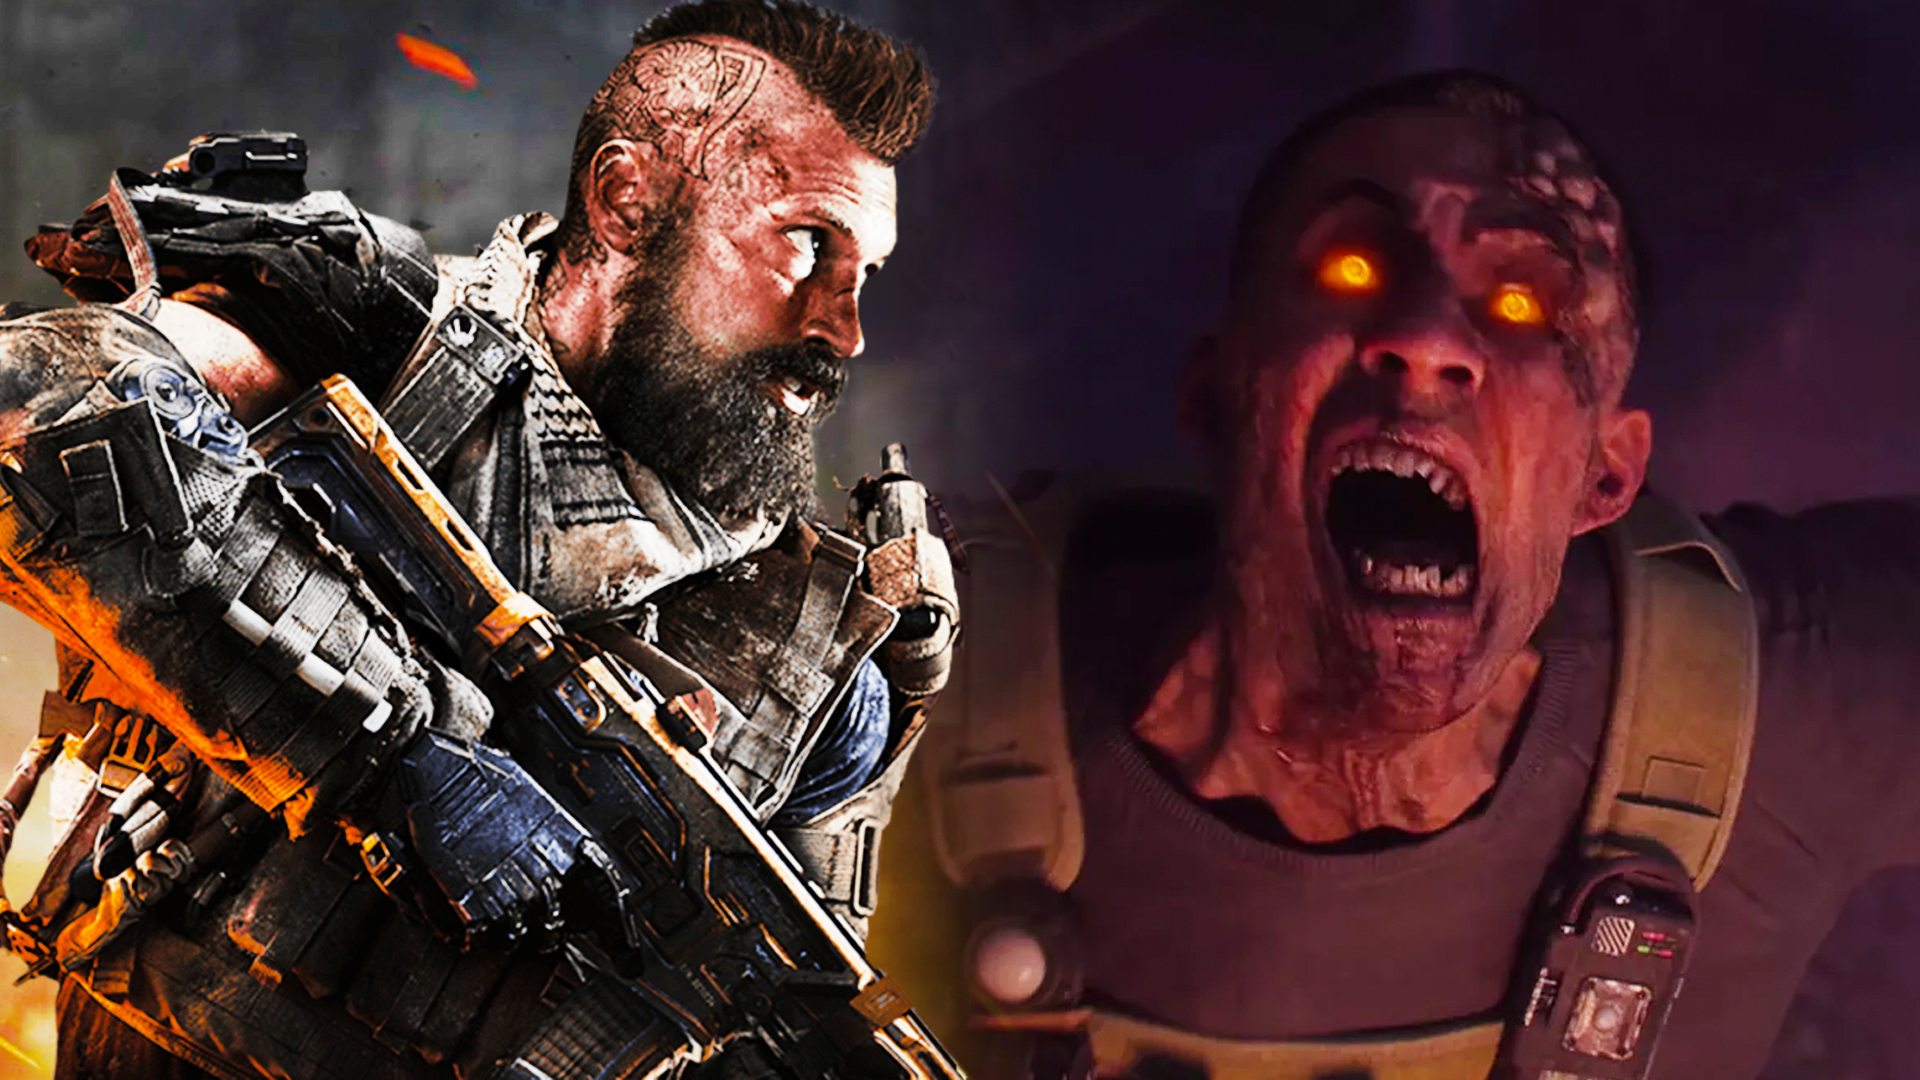 Black Ops 2024 Zombies maps and soundtracks are already being leaked